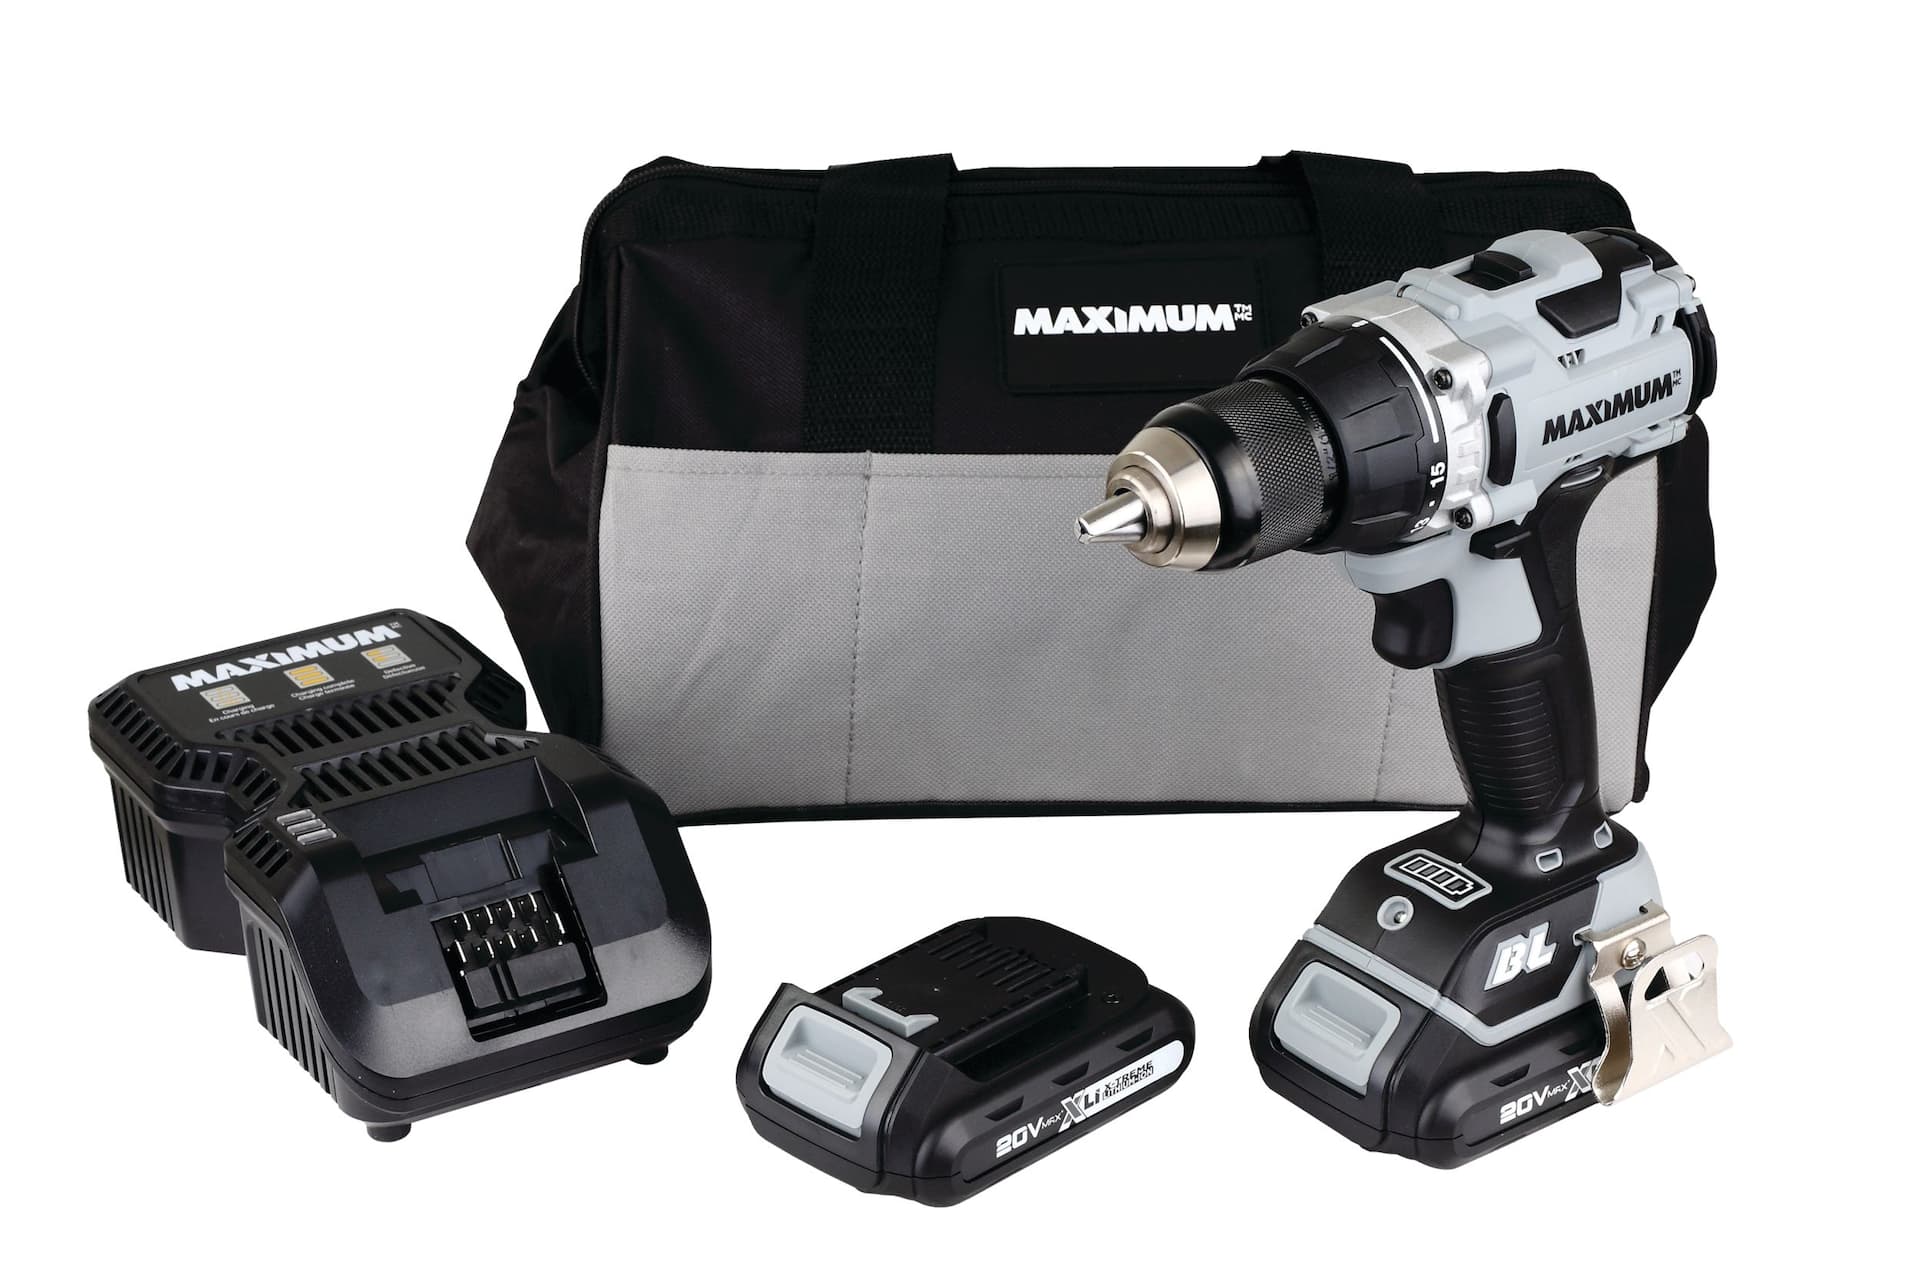 MAXIMUM 20V Max Lithium-Ion Brushless Cordless Drill with Battery, Charger  & Auxiliary Handle, 1/2-in